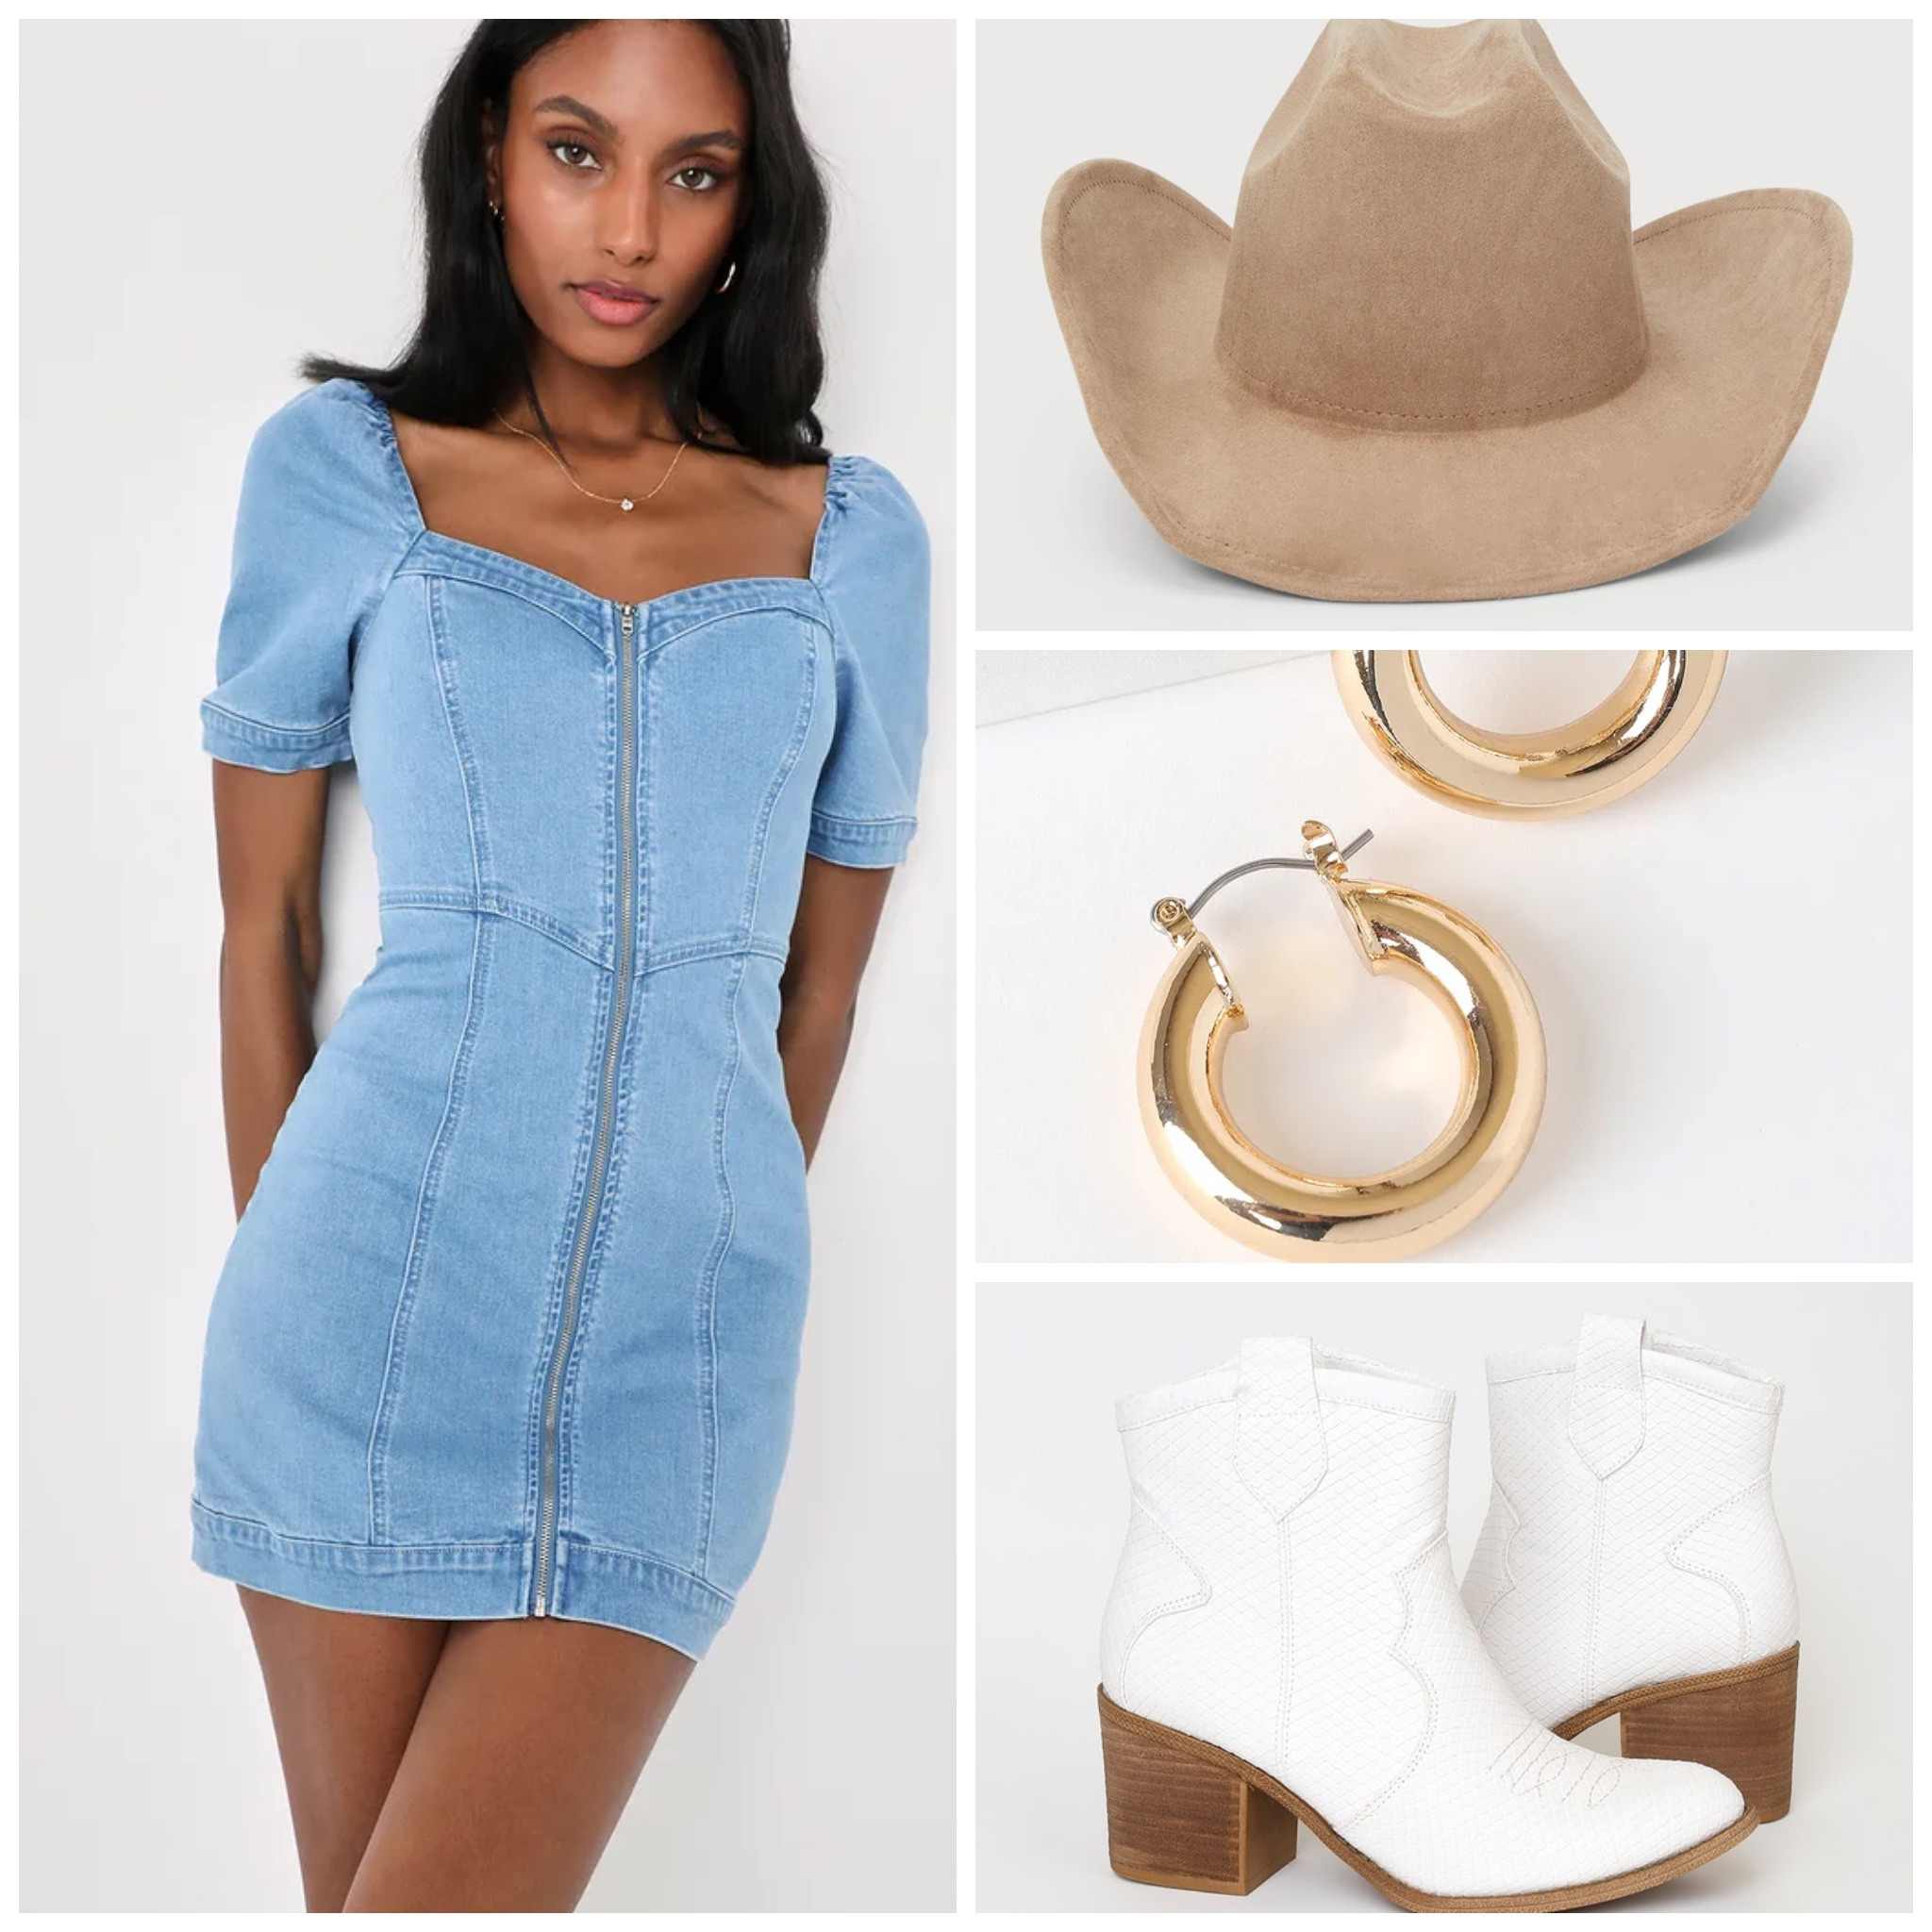 dresses for a country concert